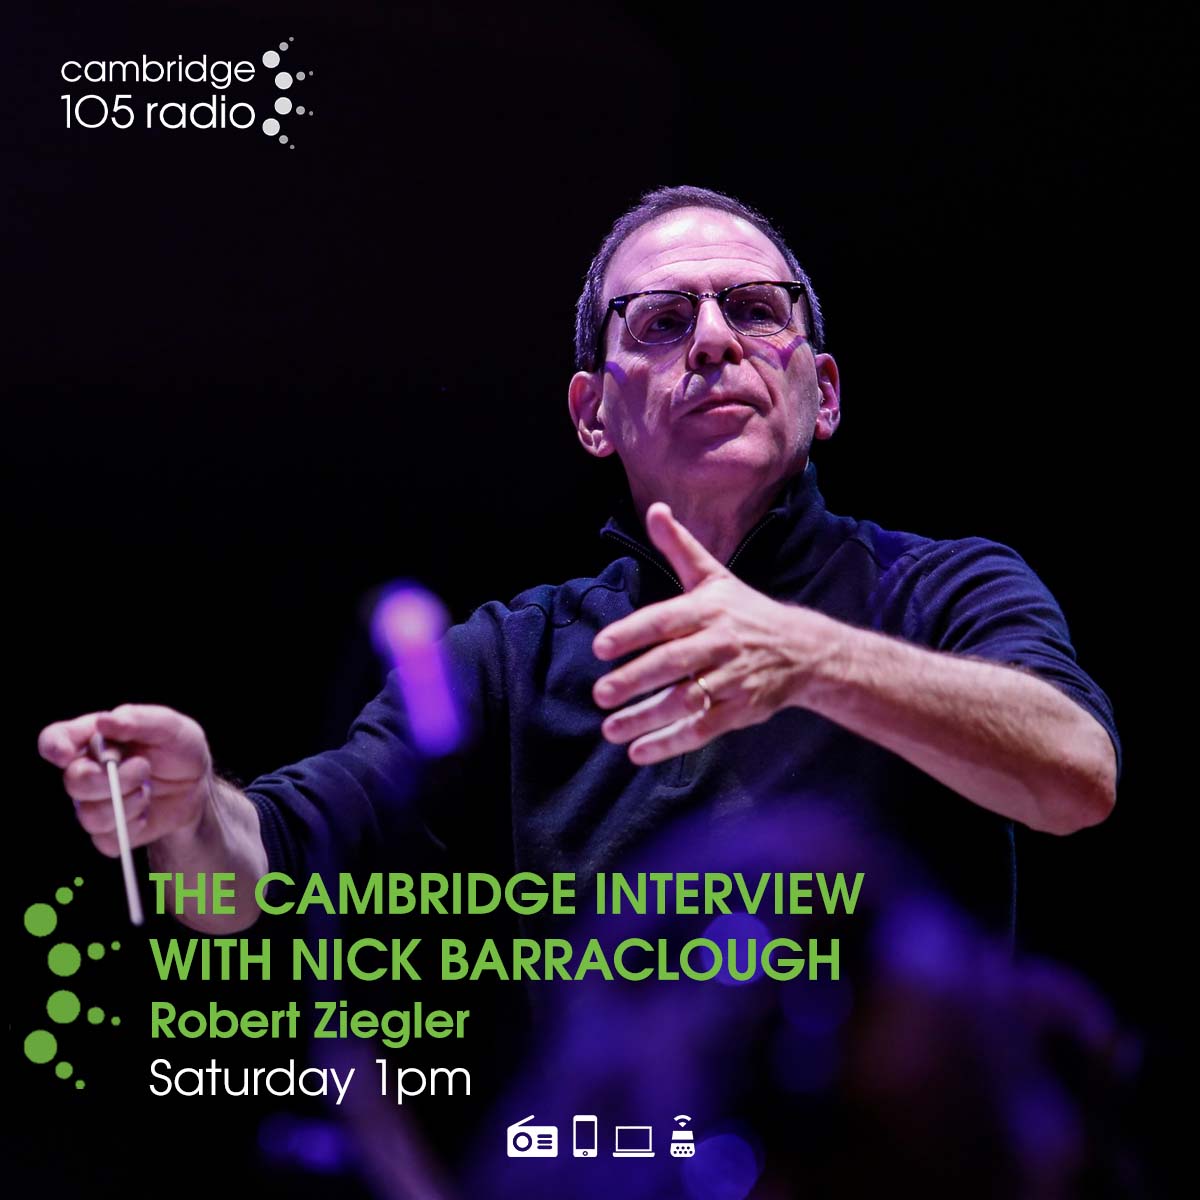 In a new series available Saturday at 1pm Nick Barraclough talks to the people who make Cambridge the remarkable place it is. In the first programme Robert Ziegler, the Los Angeles-born conductor, who’s made his home in Cambridge. @ziegler360